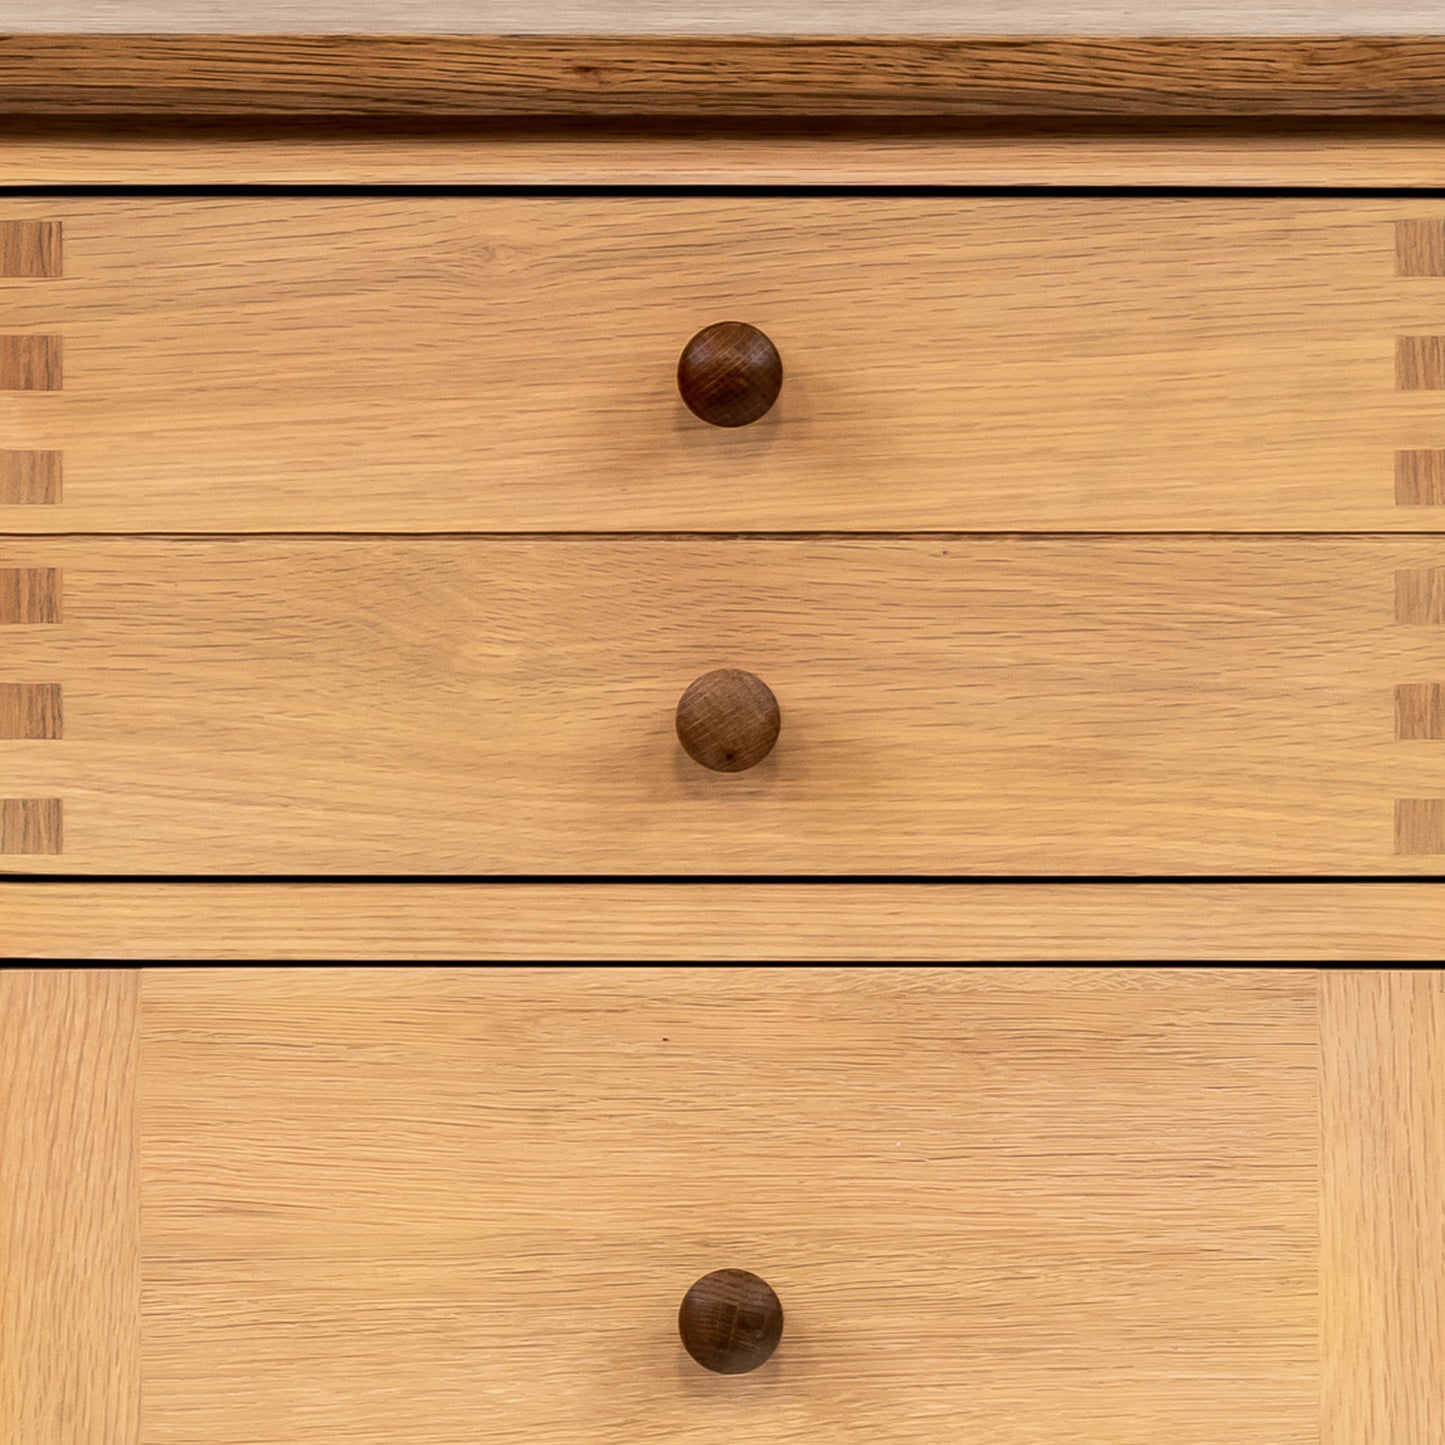 Henley Chest of Drawers - 5 Drawer Tall